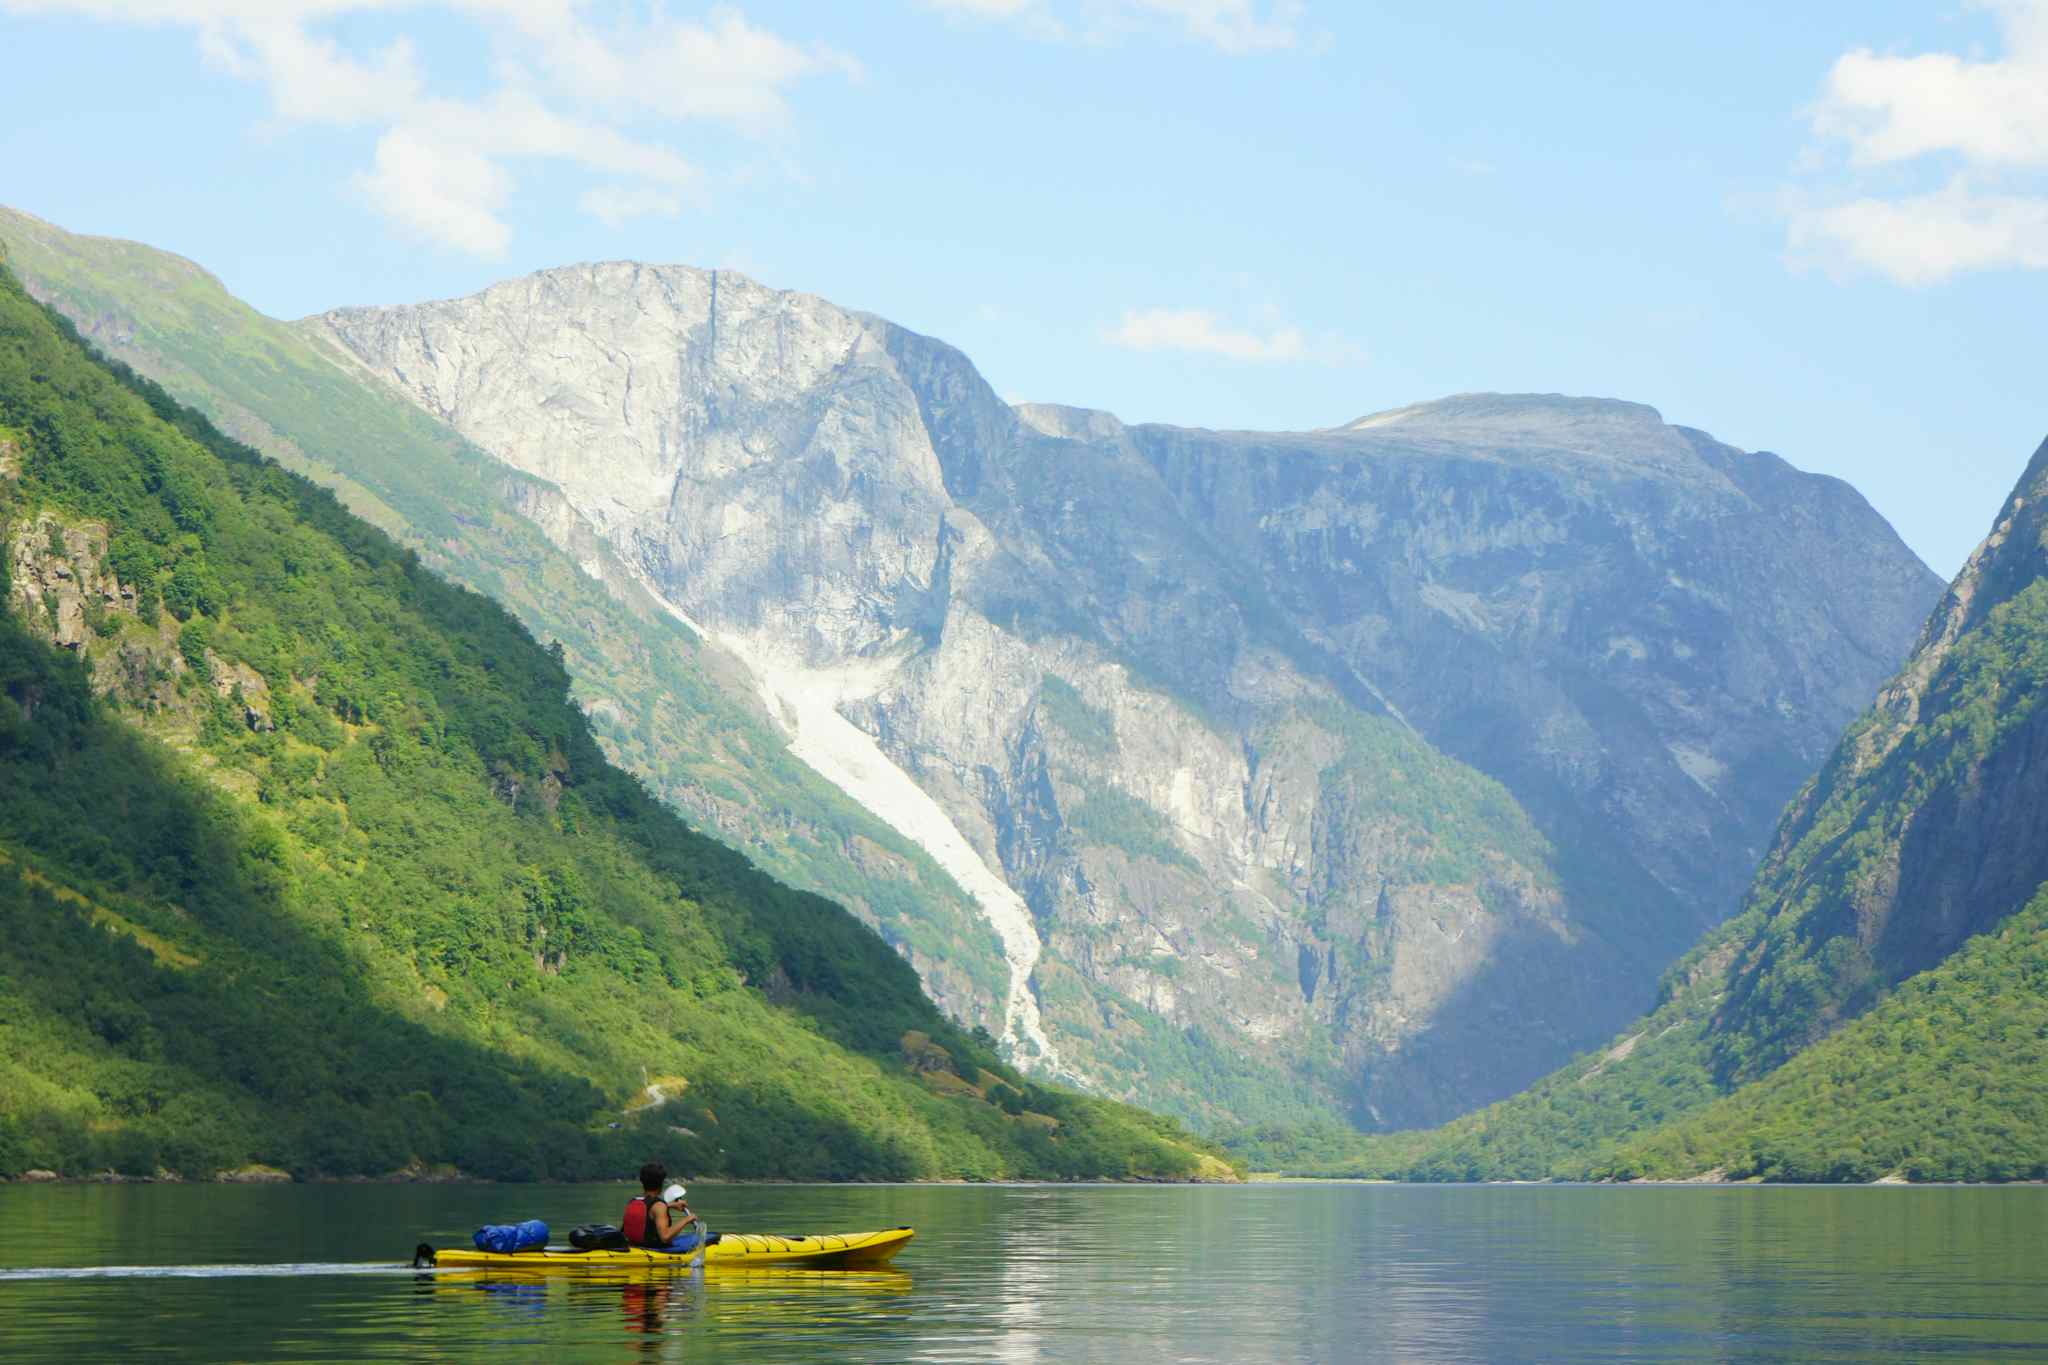 A lone kayaker paddles through the Naeroyfjord in the Norwegian Fjords.